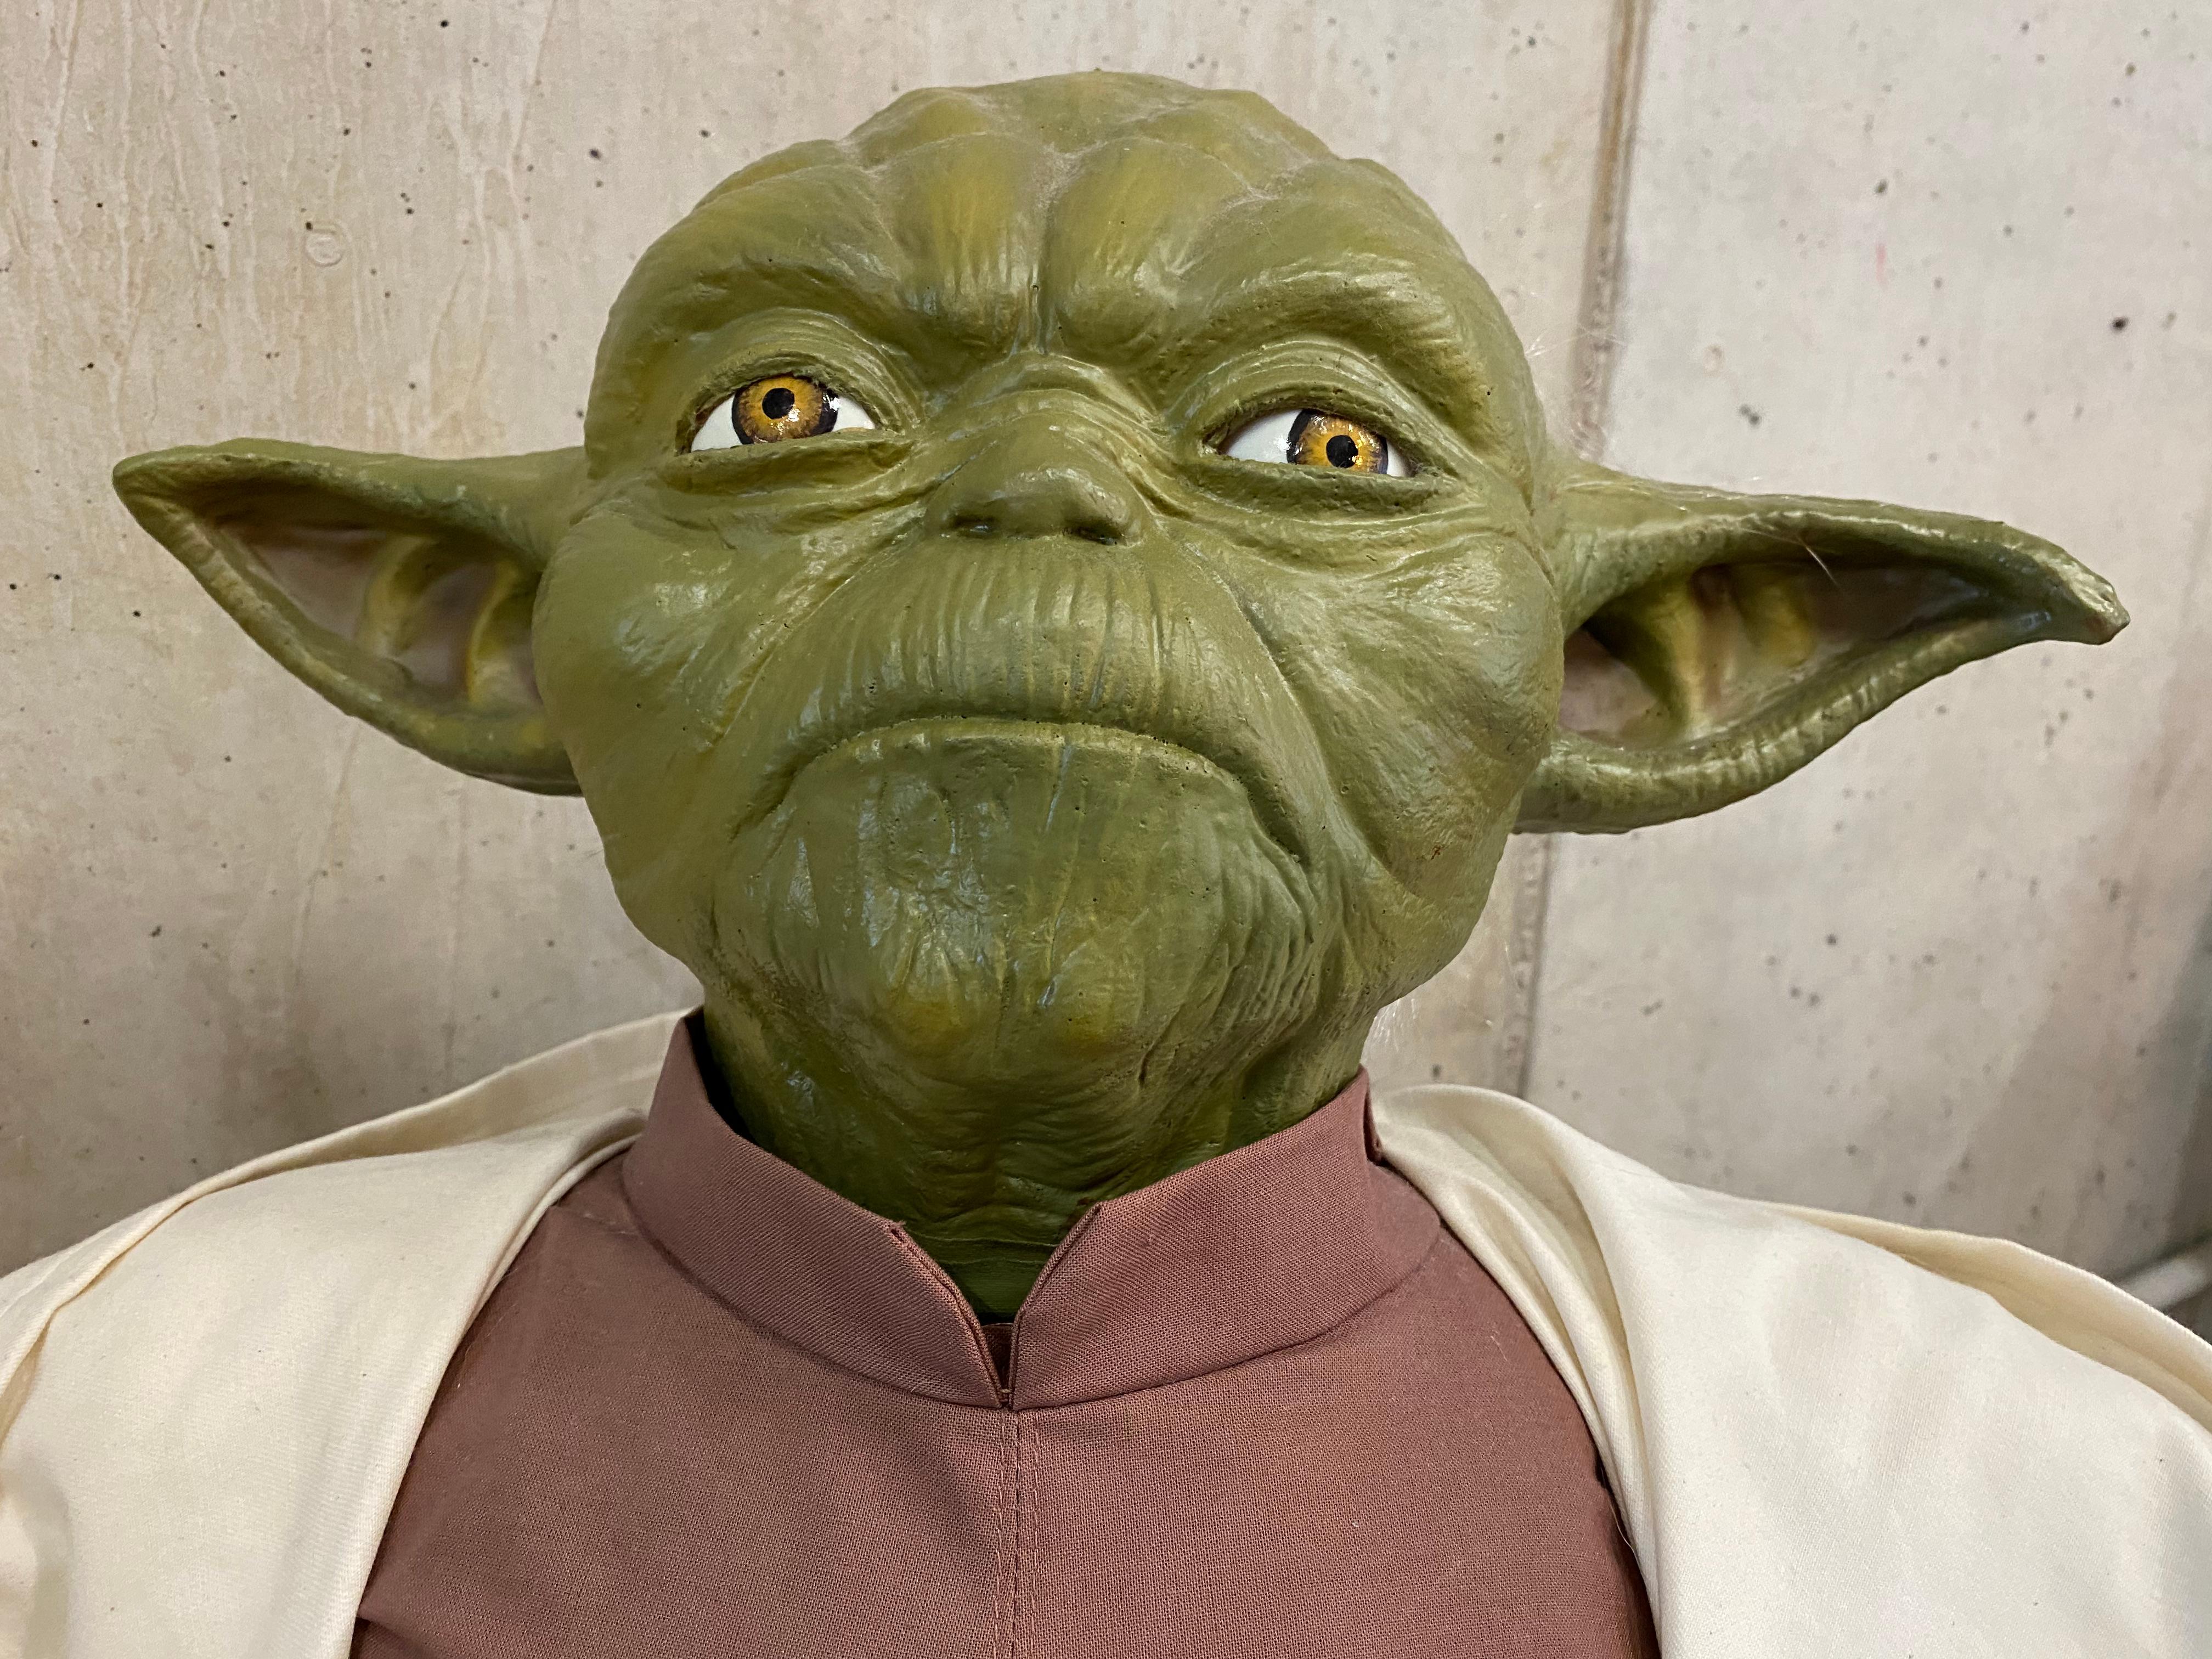 Life Size Yoda Figure, Edition of 50, Could Be Star Wars Photo Requisite For Sale 2